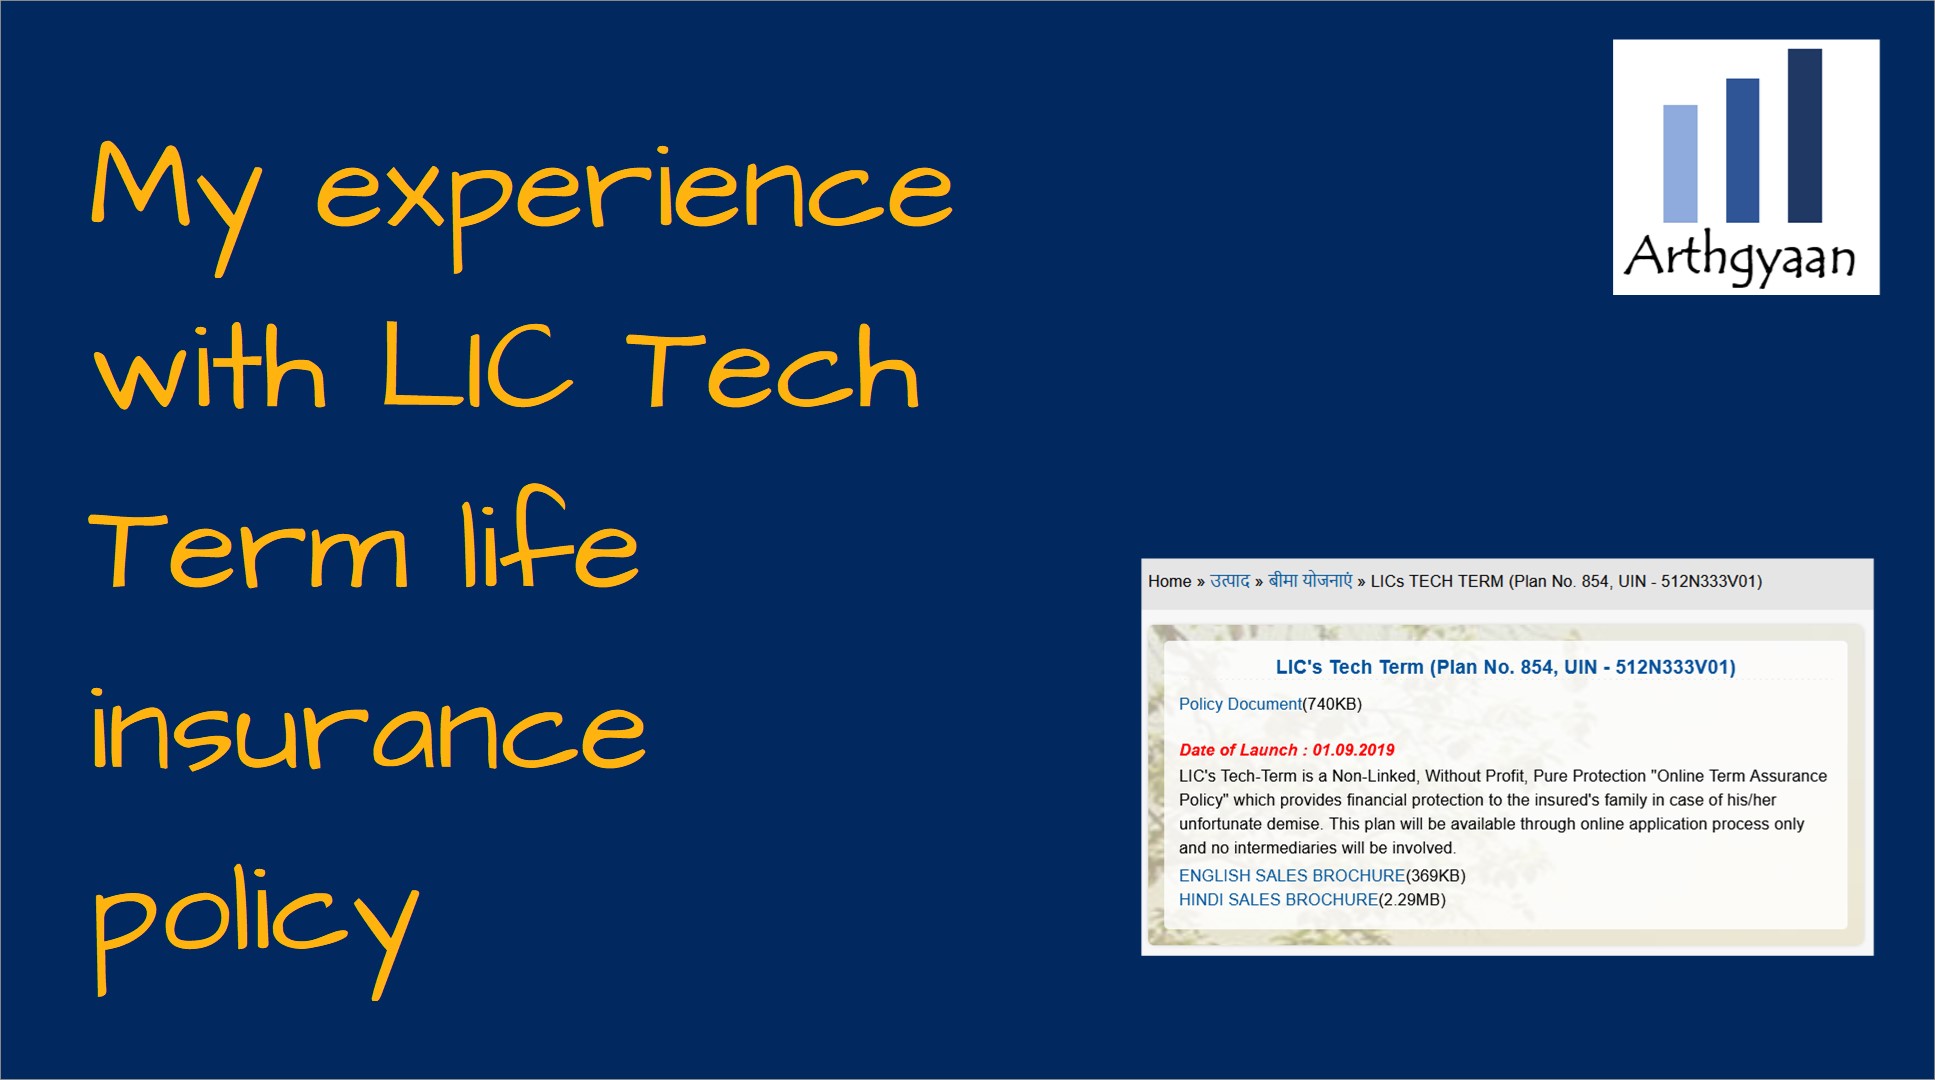 <p>This post chronicles my recent experience of applying for a LIC Tech Term life policy and why it will change your belief that LIC plans are more expensive than private insurers.</p>

